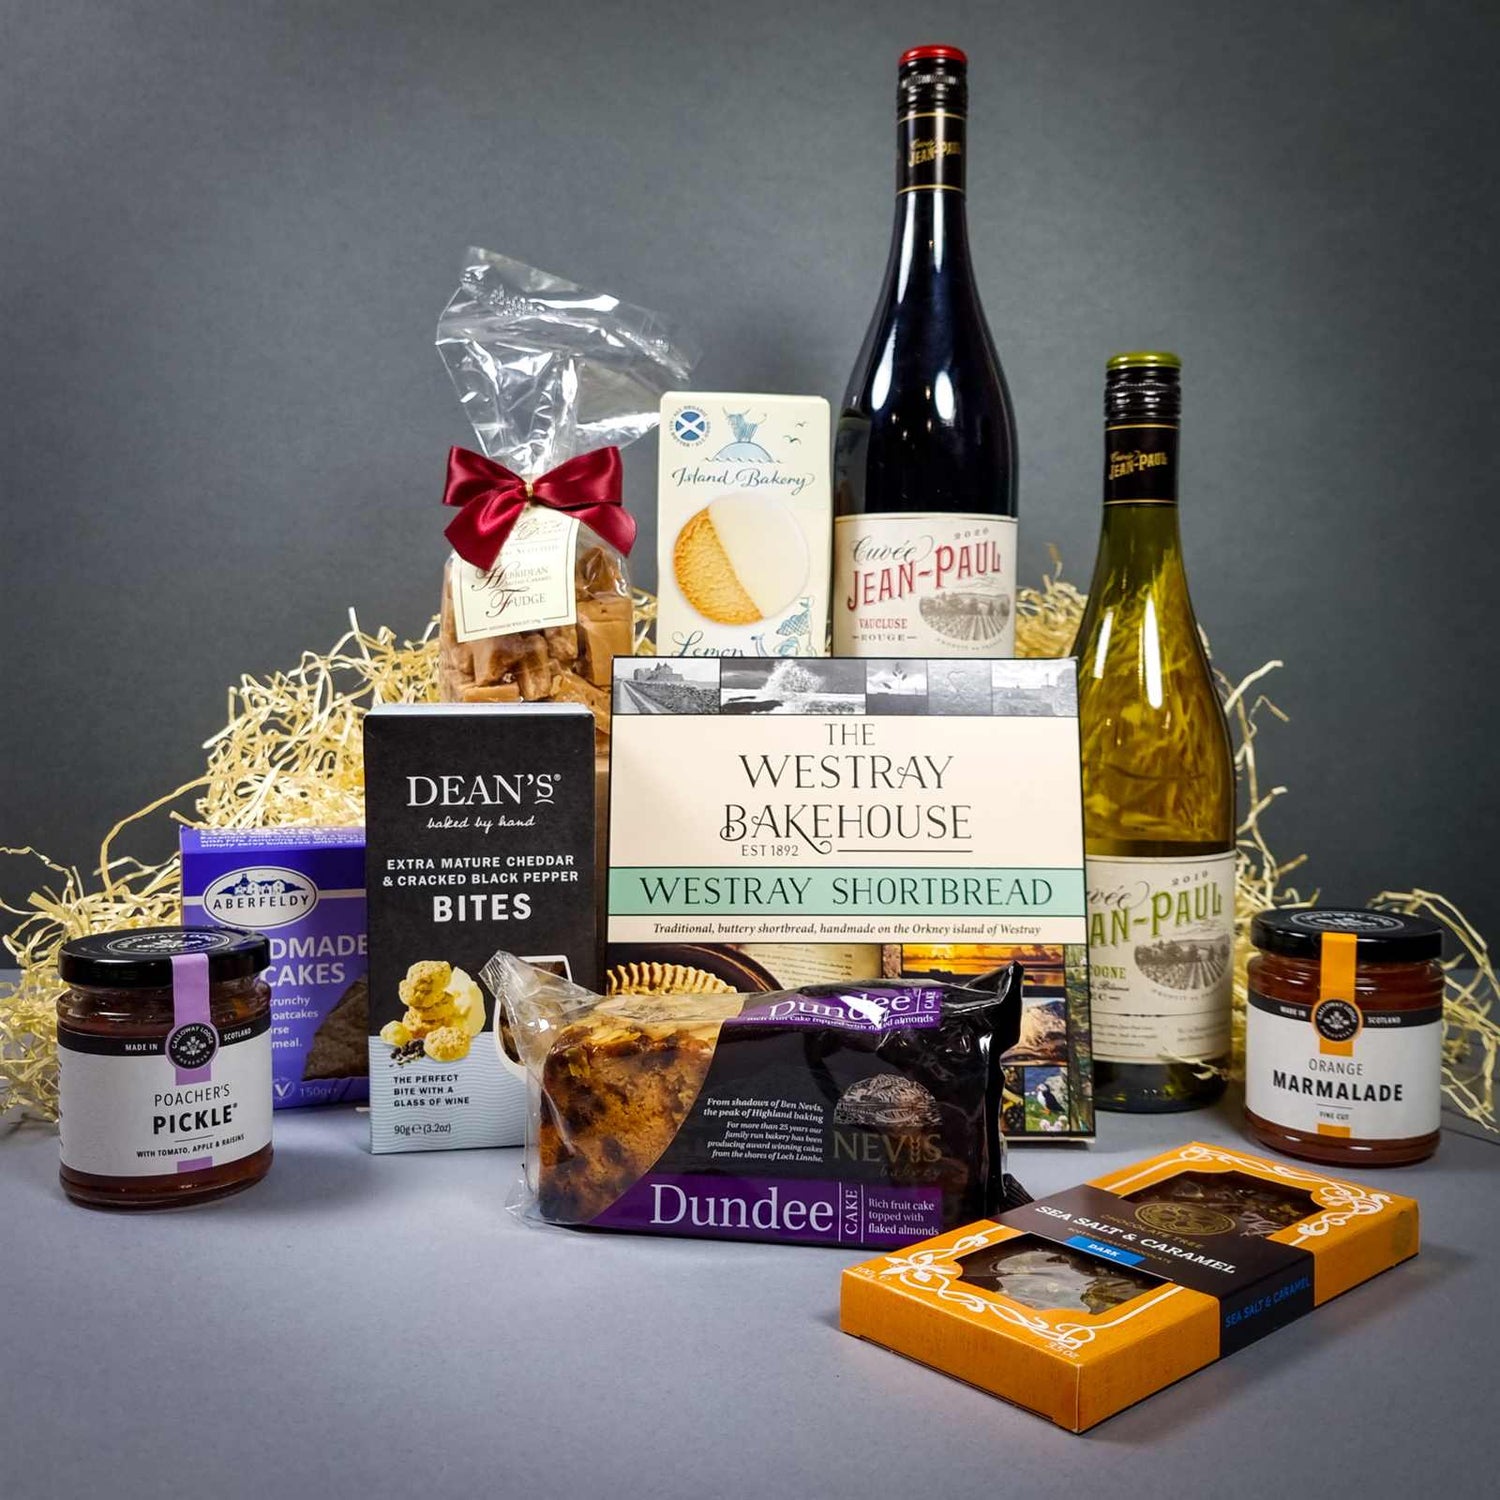 Corporate and bulk order scottish food hampers, scottish gift baskets. uk gift baskets. uk corporate gifts